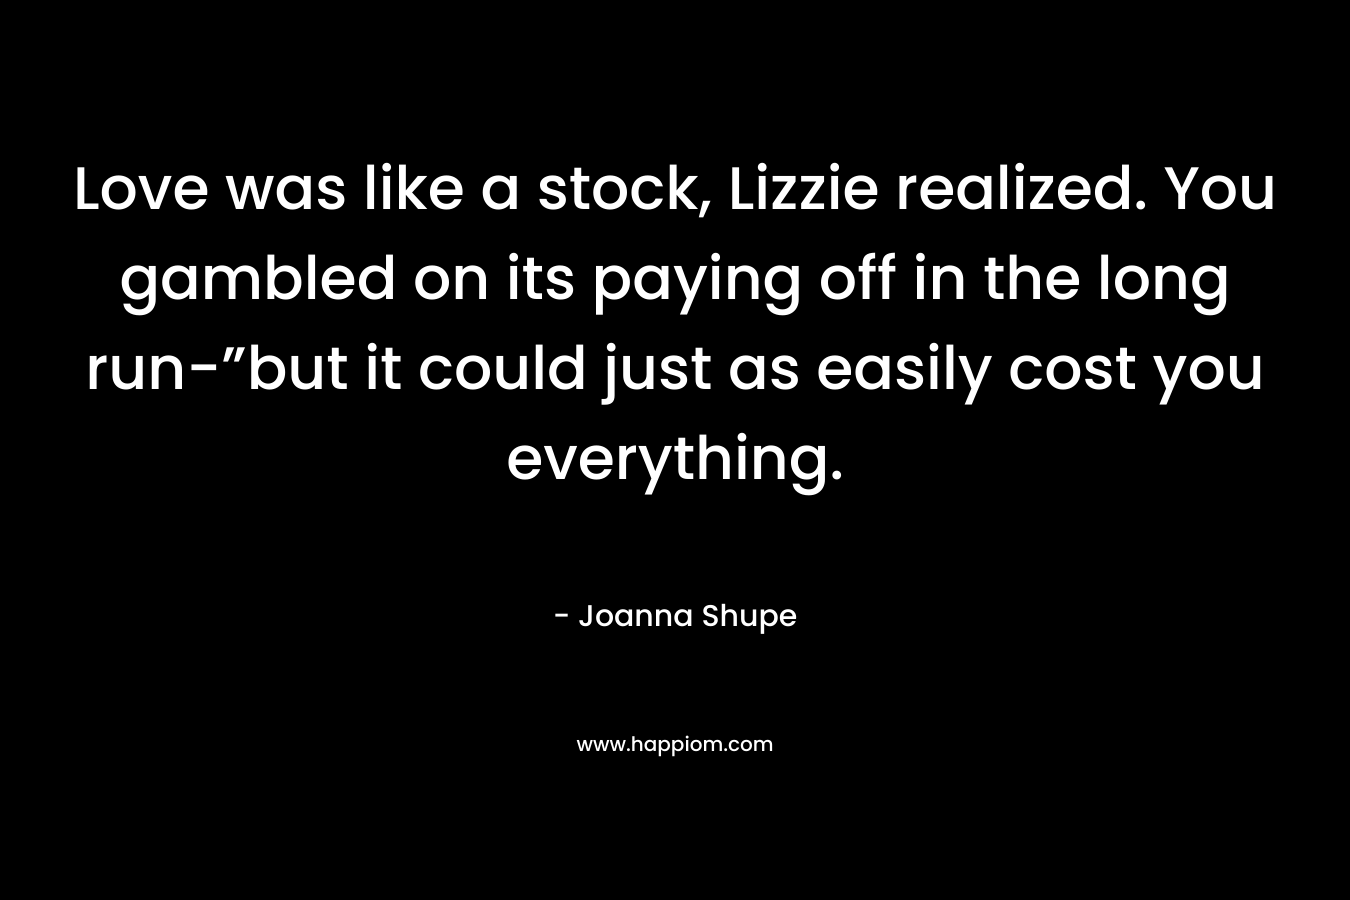 Love was like a stock, Lizzie realized. You gambled on its paying off in the long run-”but it could just as easily cost you everything. – Joanna Shupe